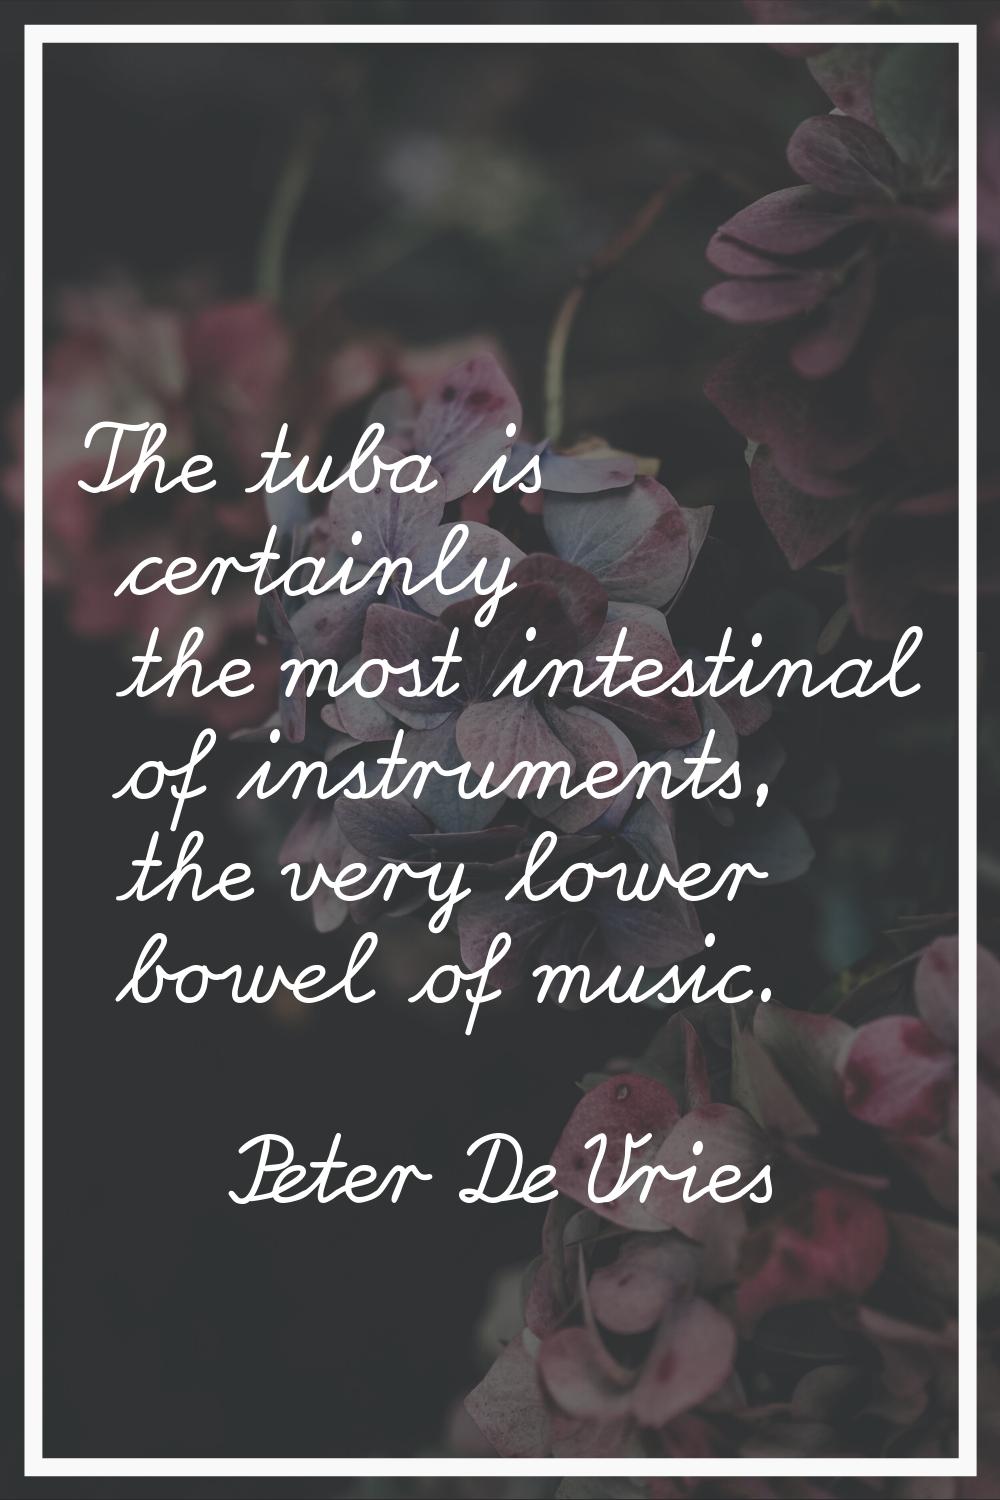 The tuba is certainly the most intestinal of instruments, the very lower bowel of music.